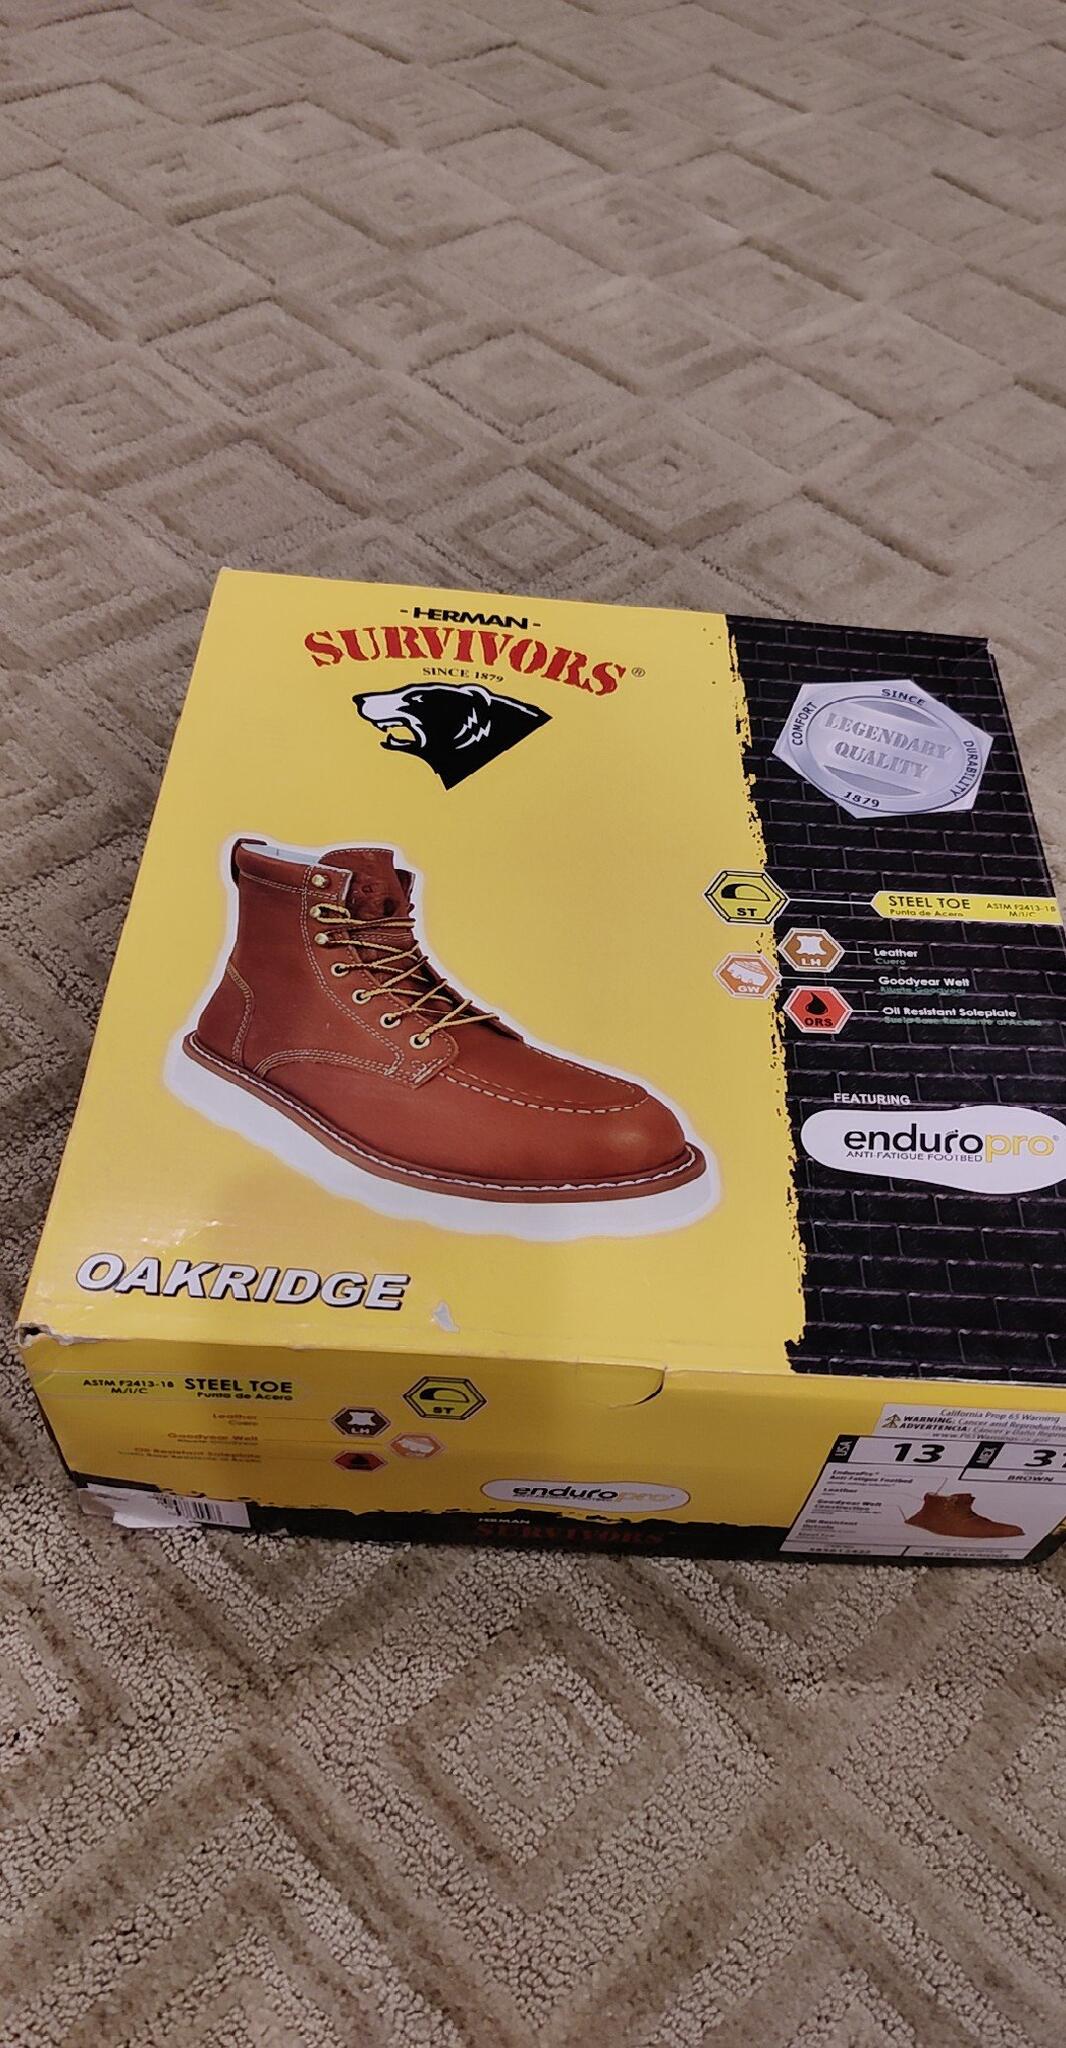 Brand New Work Boots Size 13 for $20 in Severn, MD | For Sale & Free ...